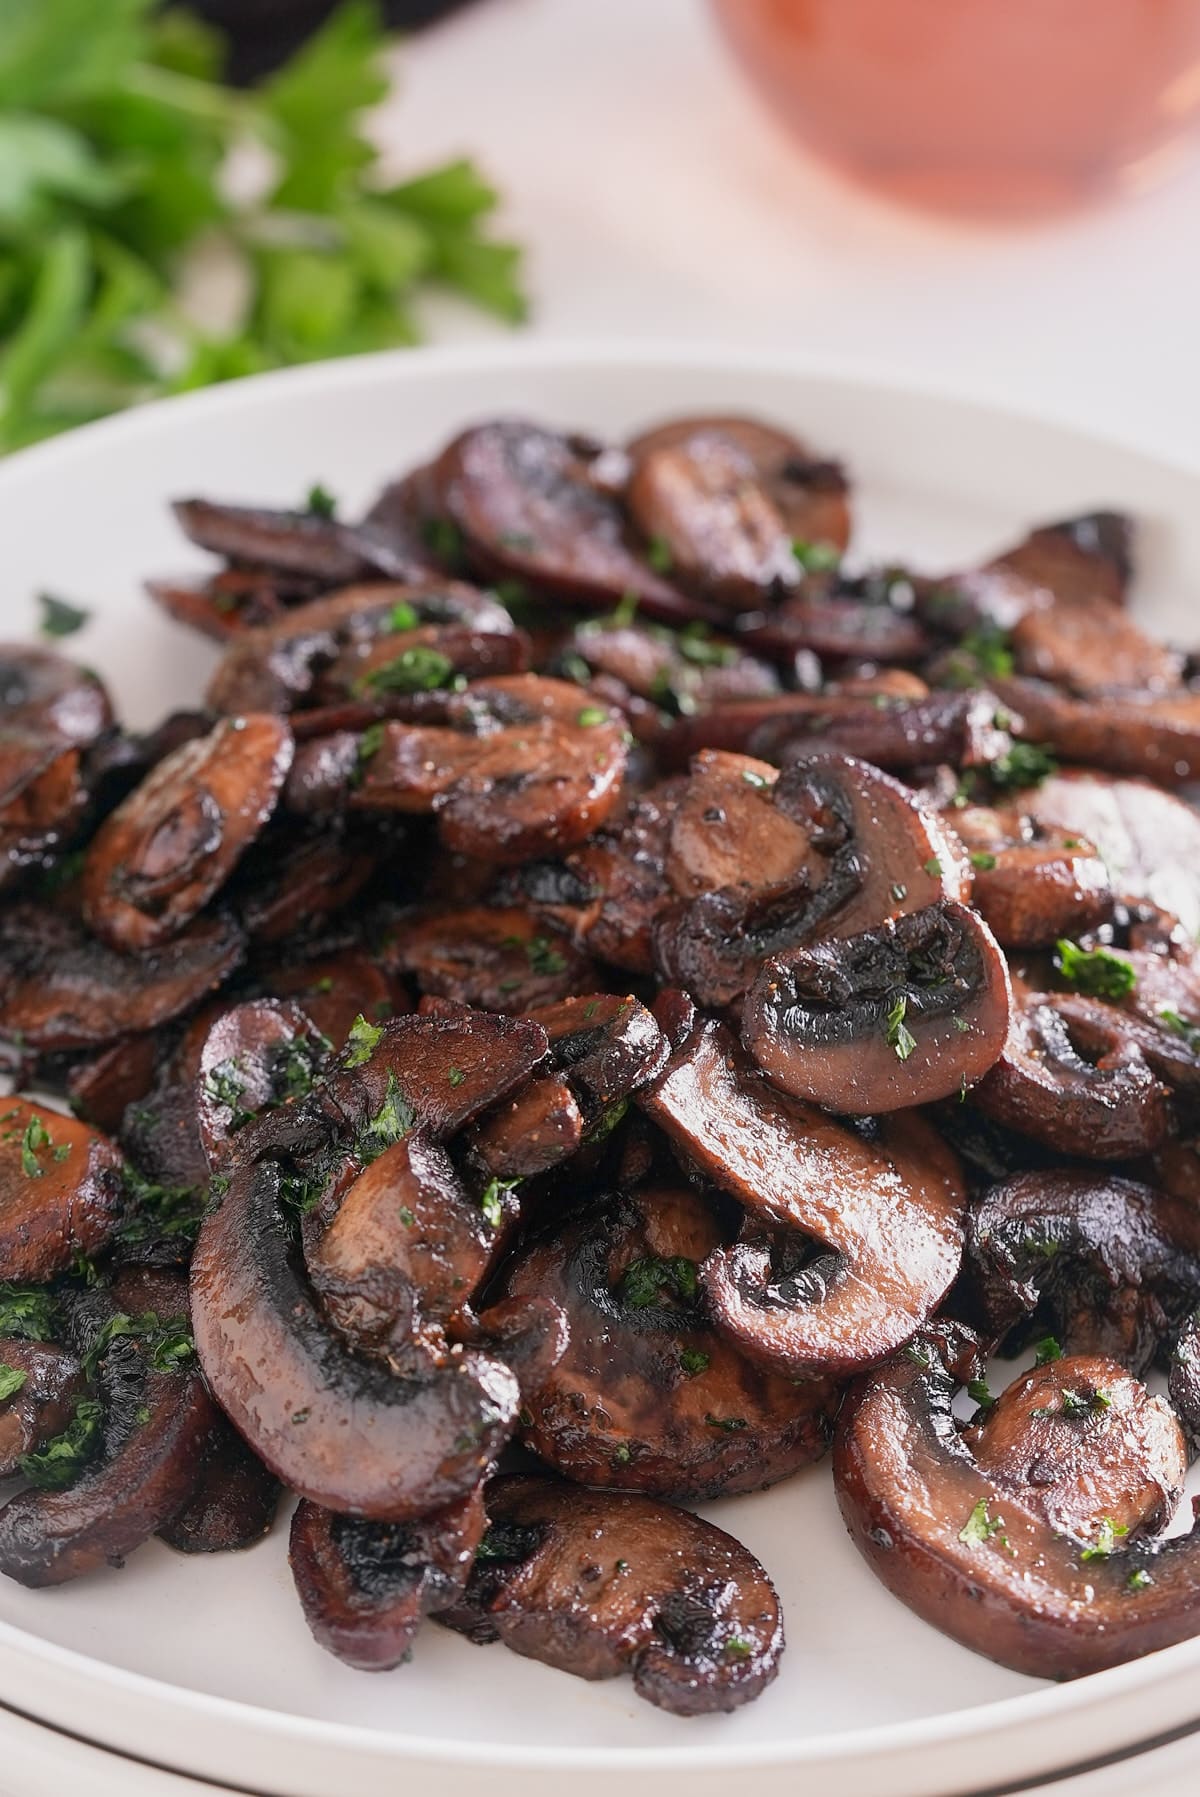 A white plate piled high with sauteed mushrooms.